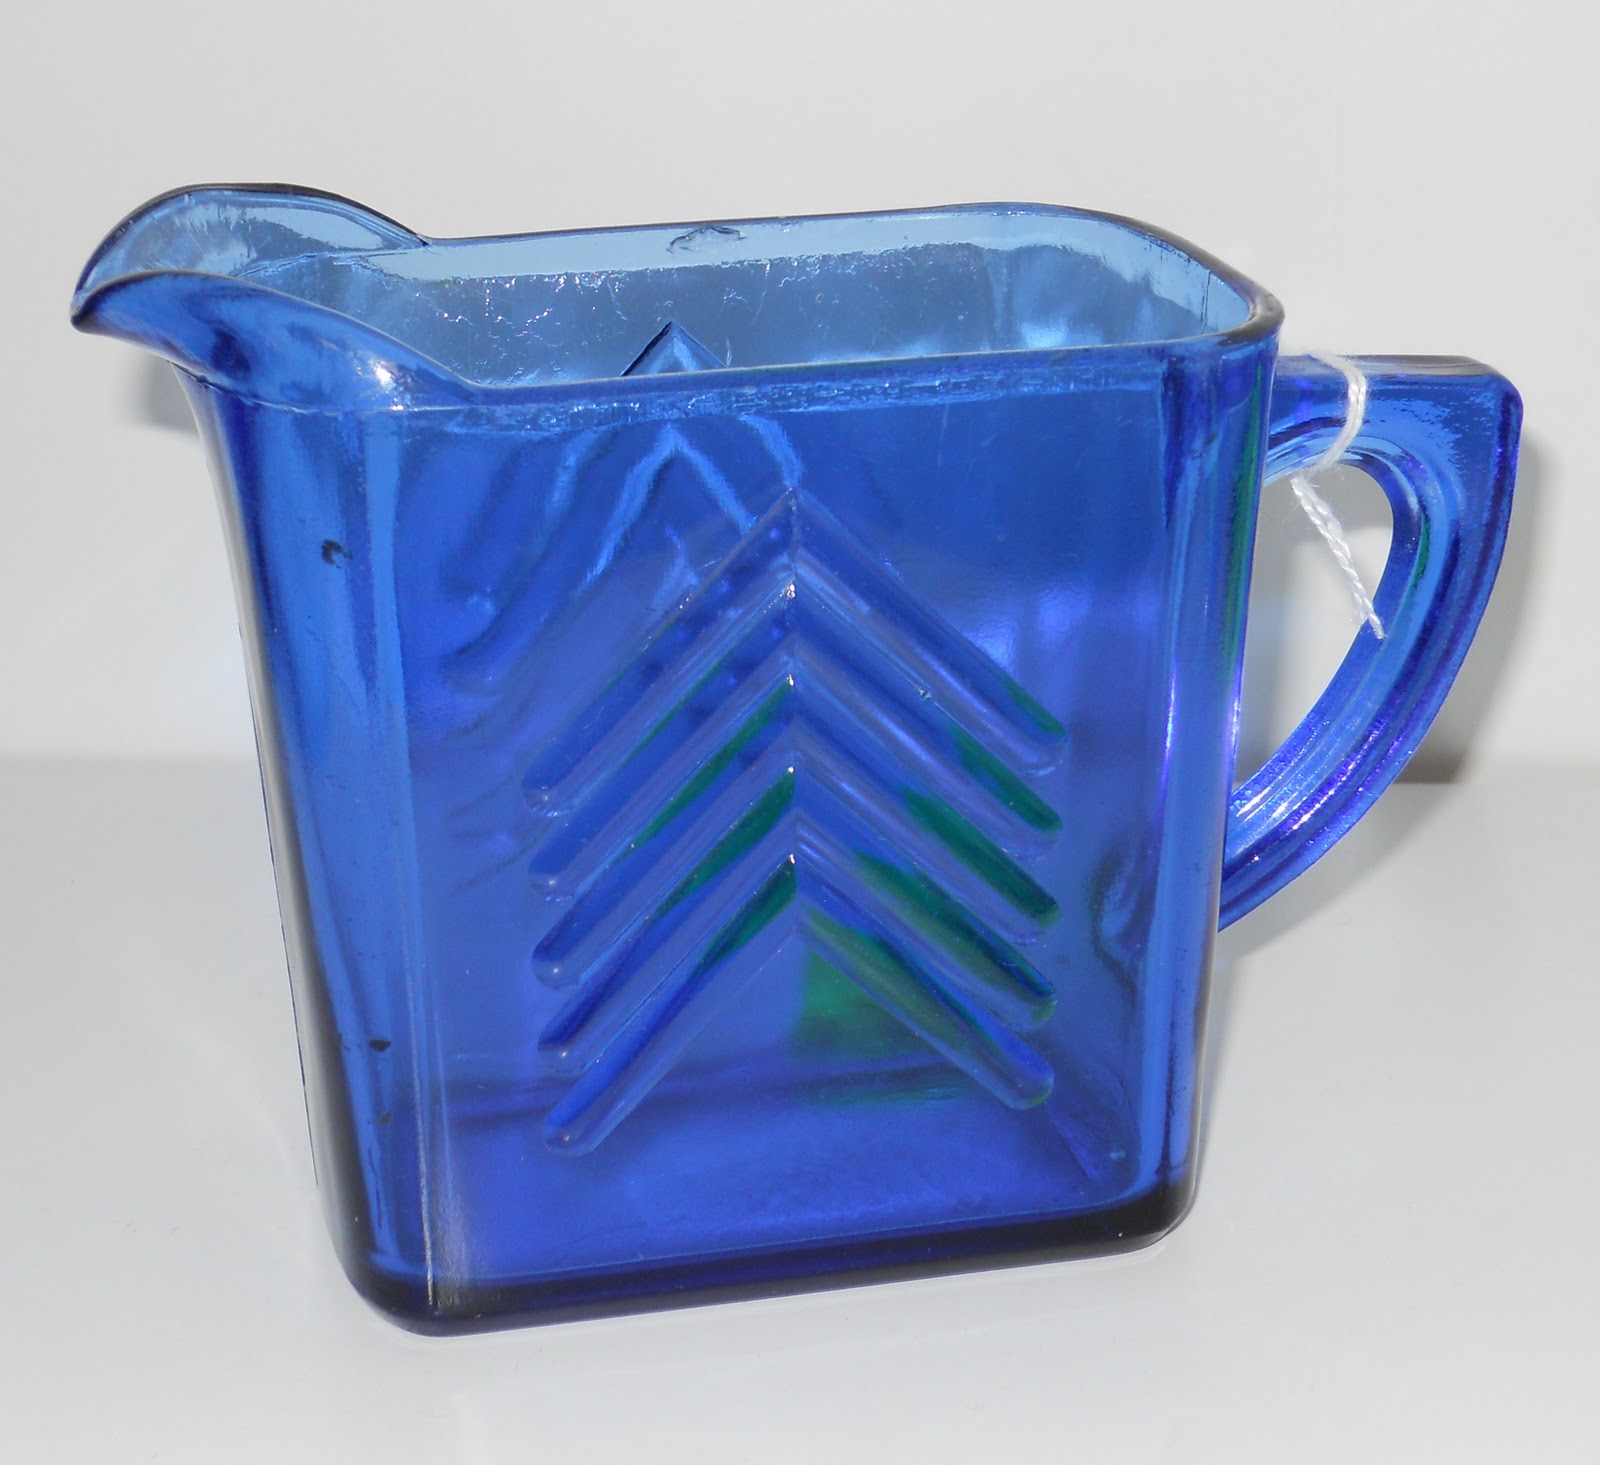 Download Antiques for Today's Lifestyle: Cobalt Blue Depression Glass